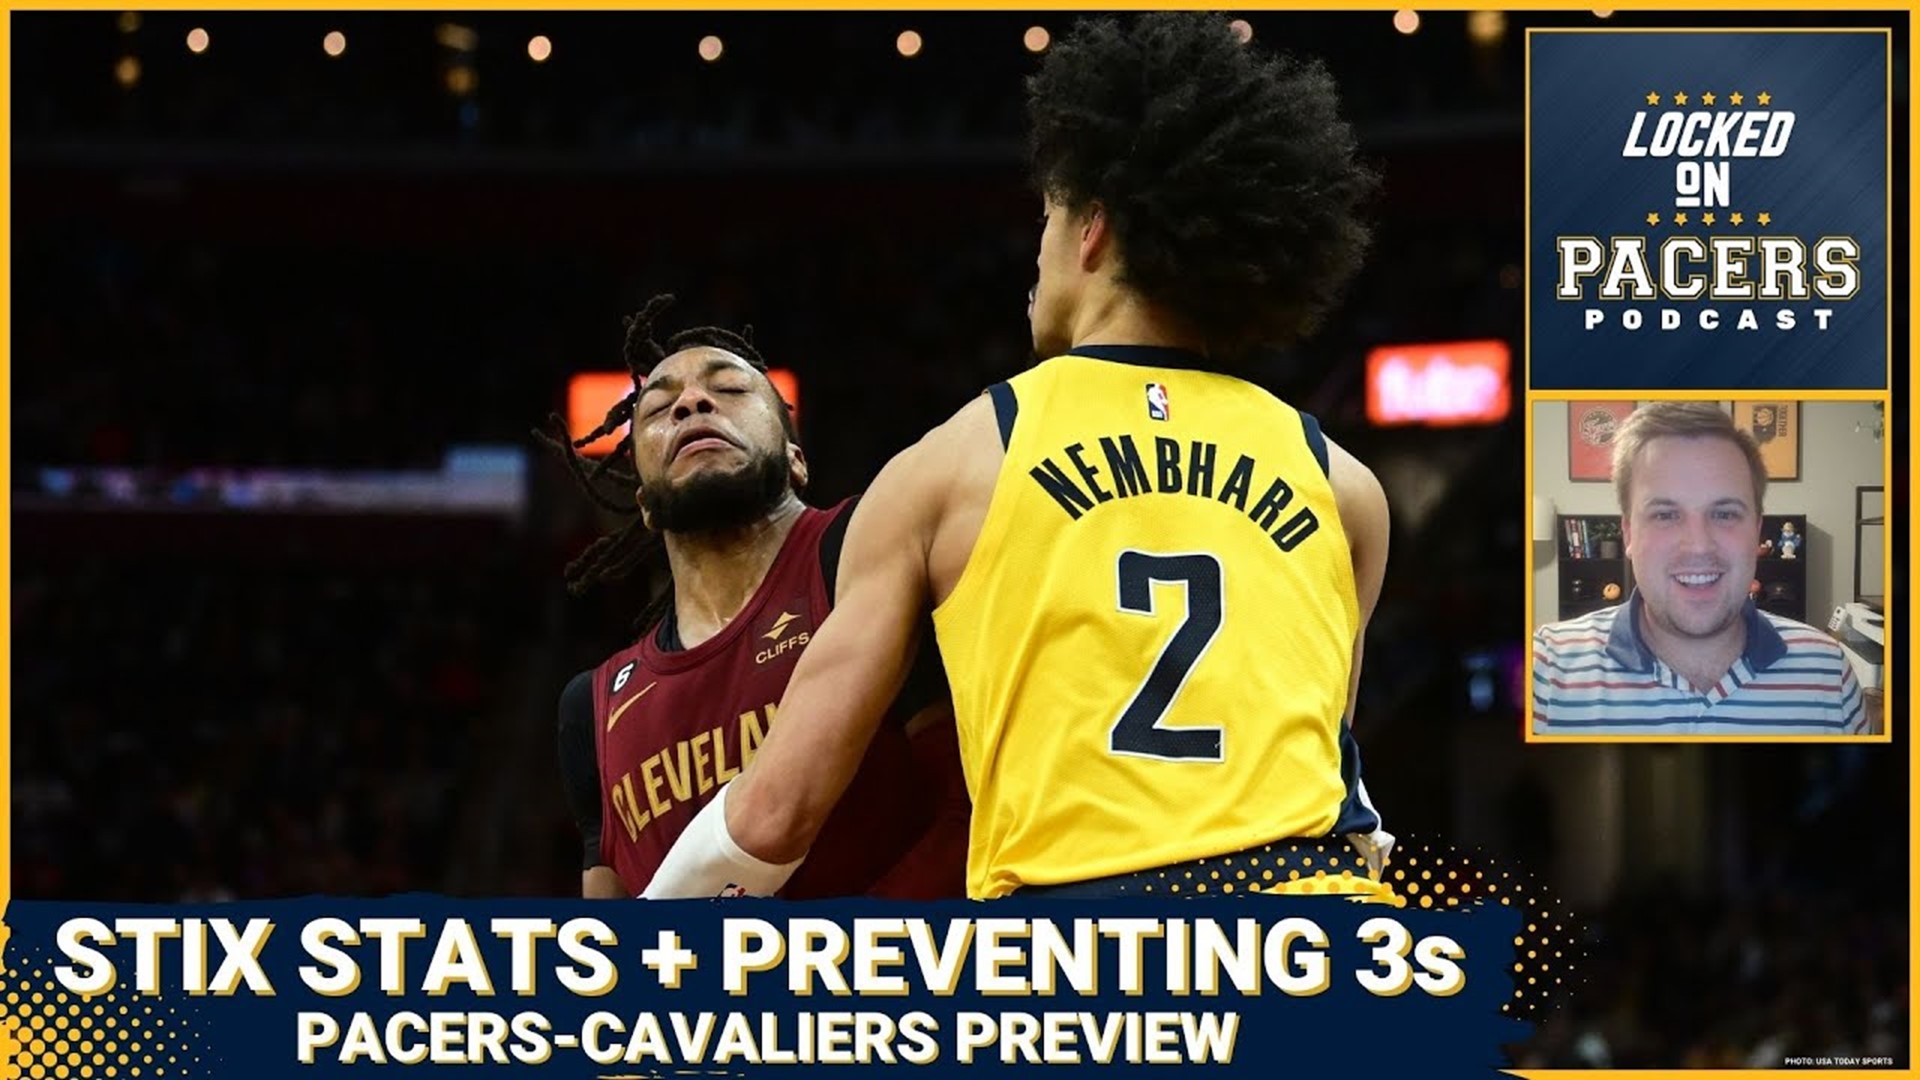 Can Jalen Smith continue to earn reserve 5 minutes? Indiana Pacers preventing 3s, Cavs preview